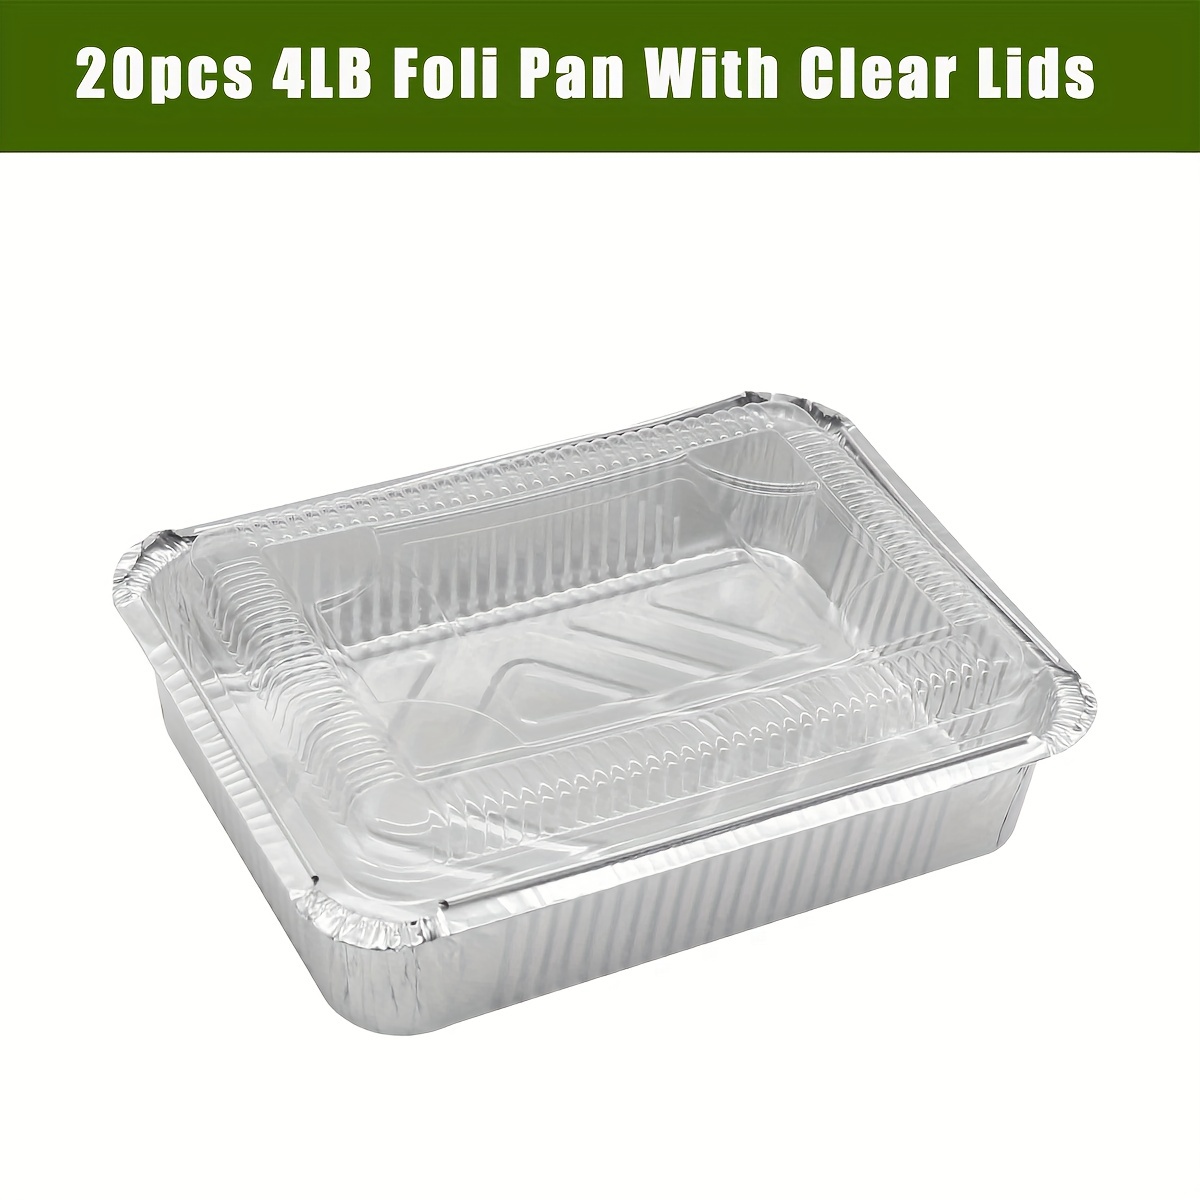 20Pcs 8 X 8 Heavy Duty Square Disposable Aluminum Tin Foil Pans with Lids  Food Storage Tray Extra-Sturdy Containers for Cooking, Baking, Meal Prep,  Takeout